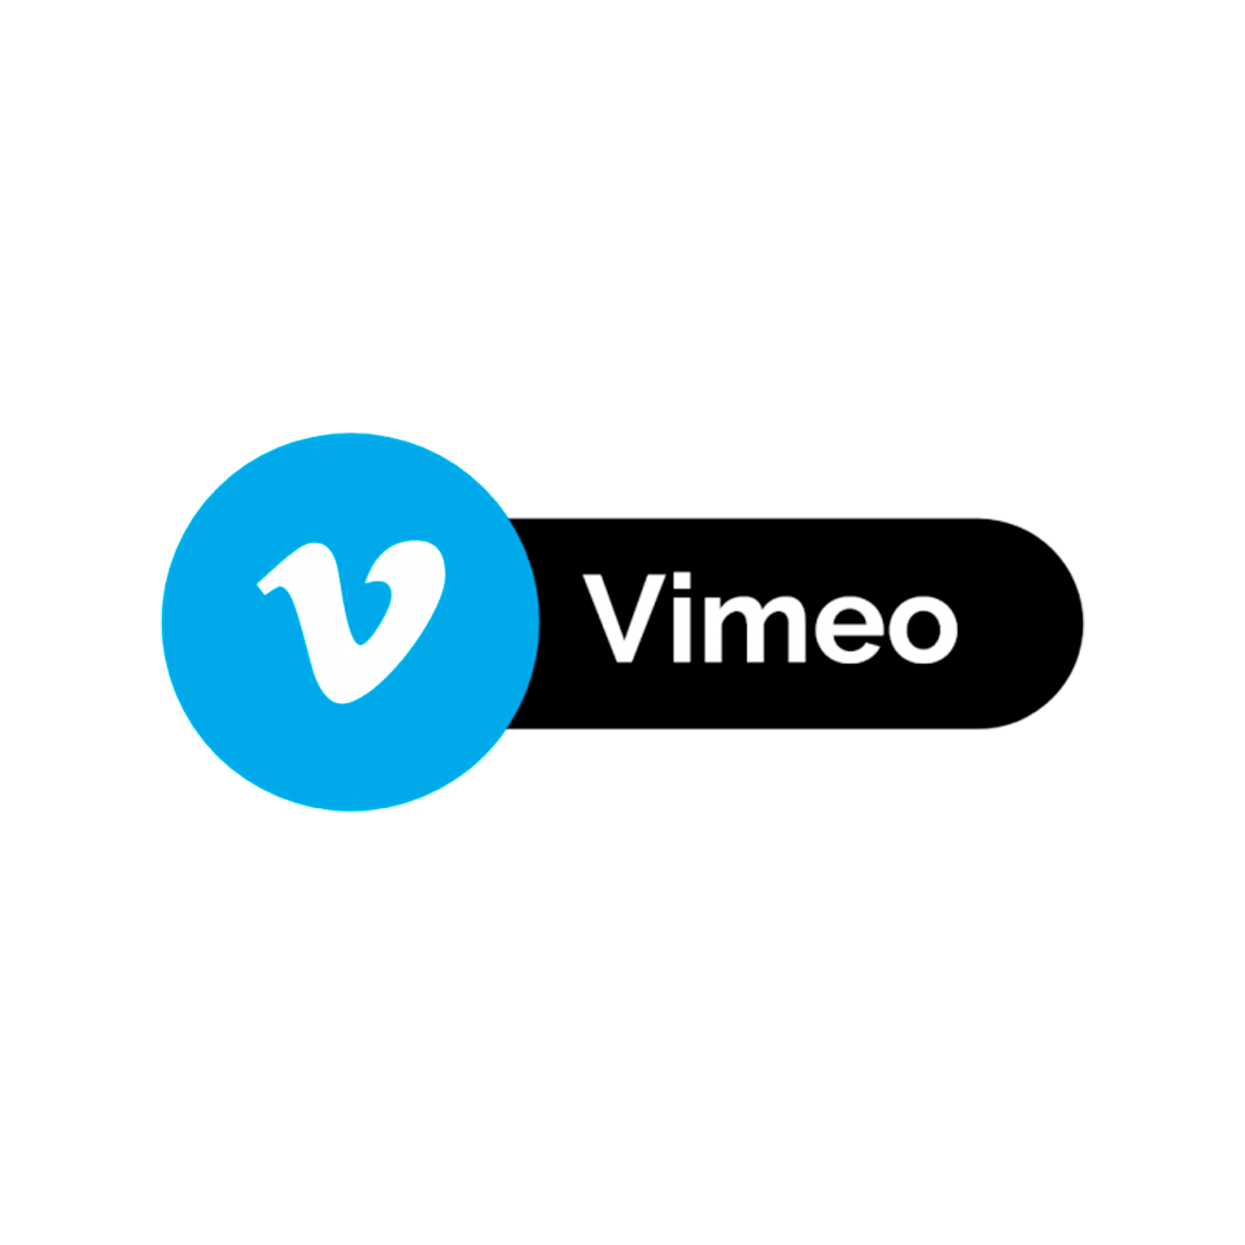 Vimeo teams forex trading in islamic perspective on loan